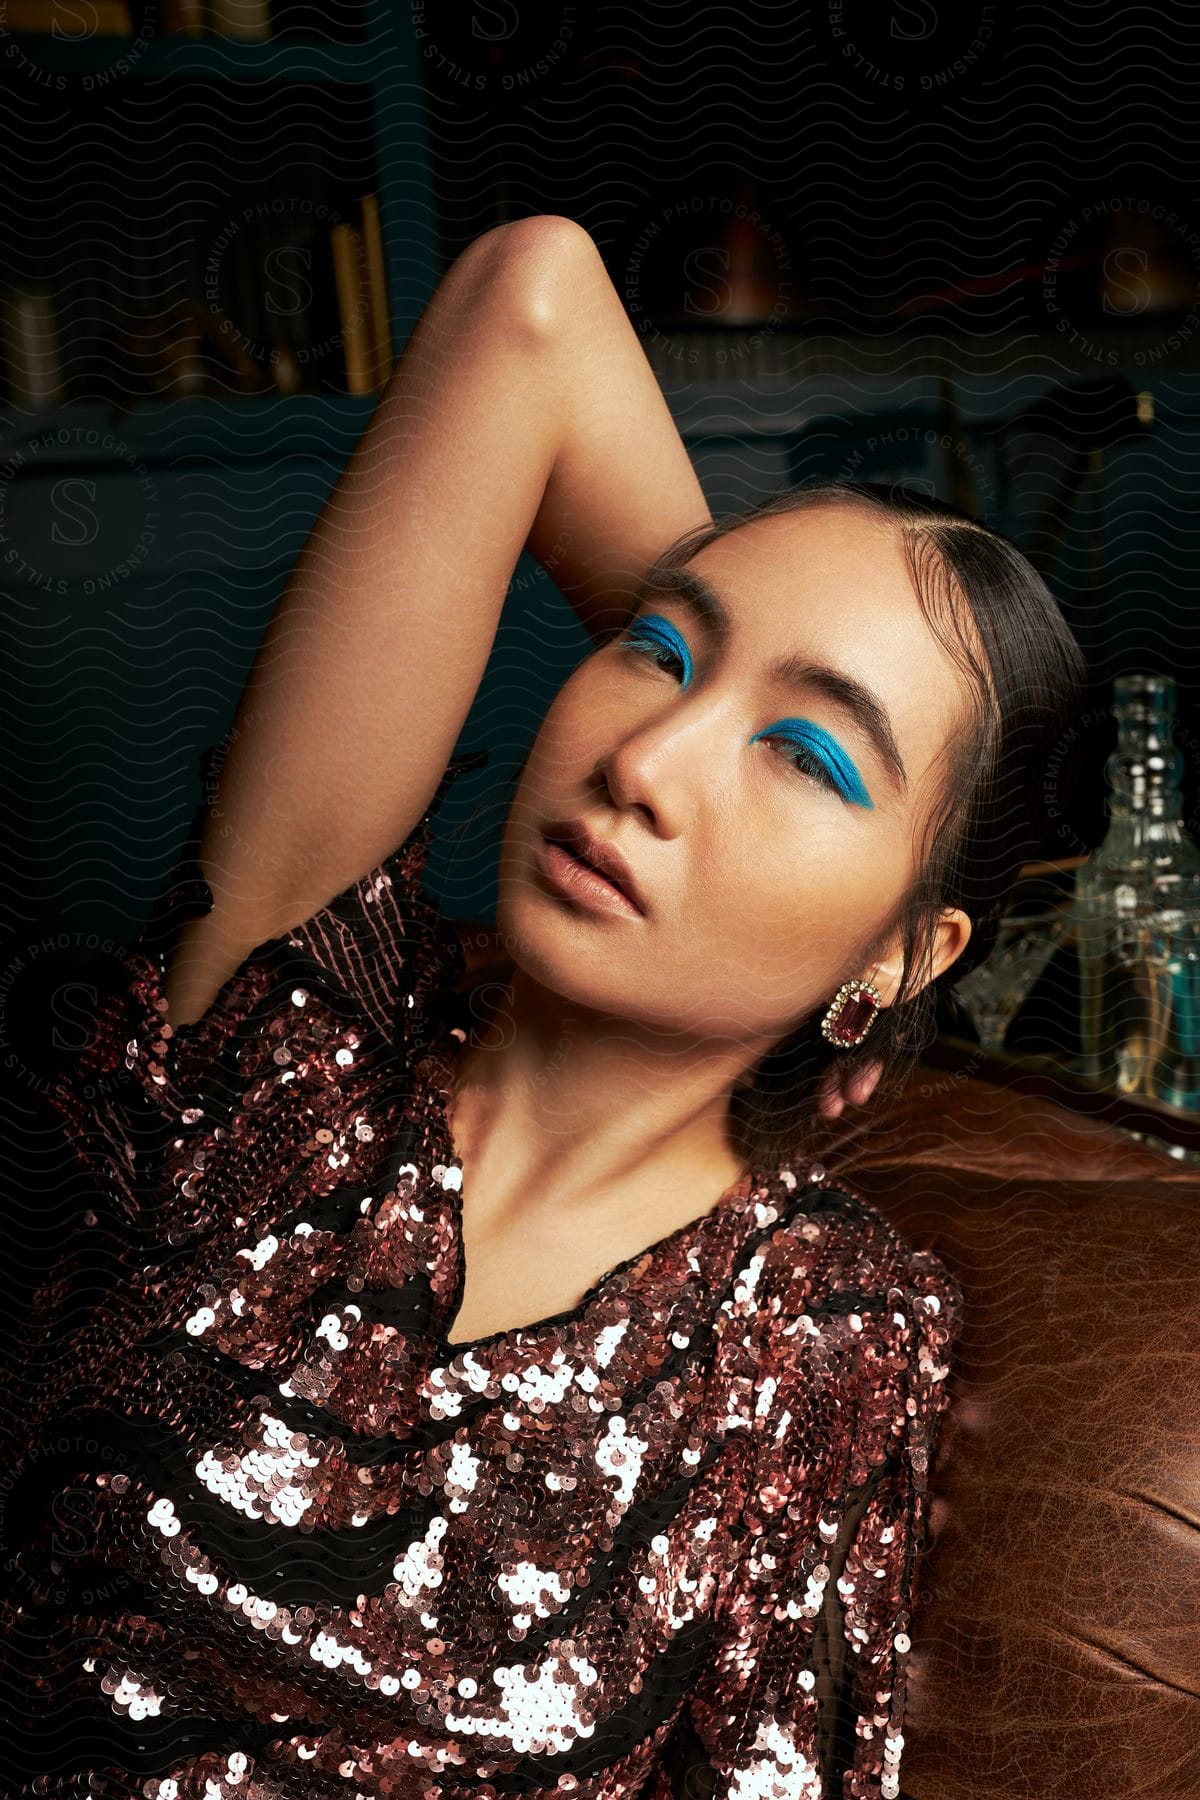 A portrait of an Asian woman with blue eye makeup and wearing a dress with small bright red details and she has her hand on the back of her head